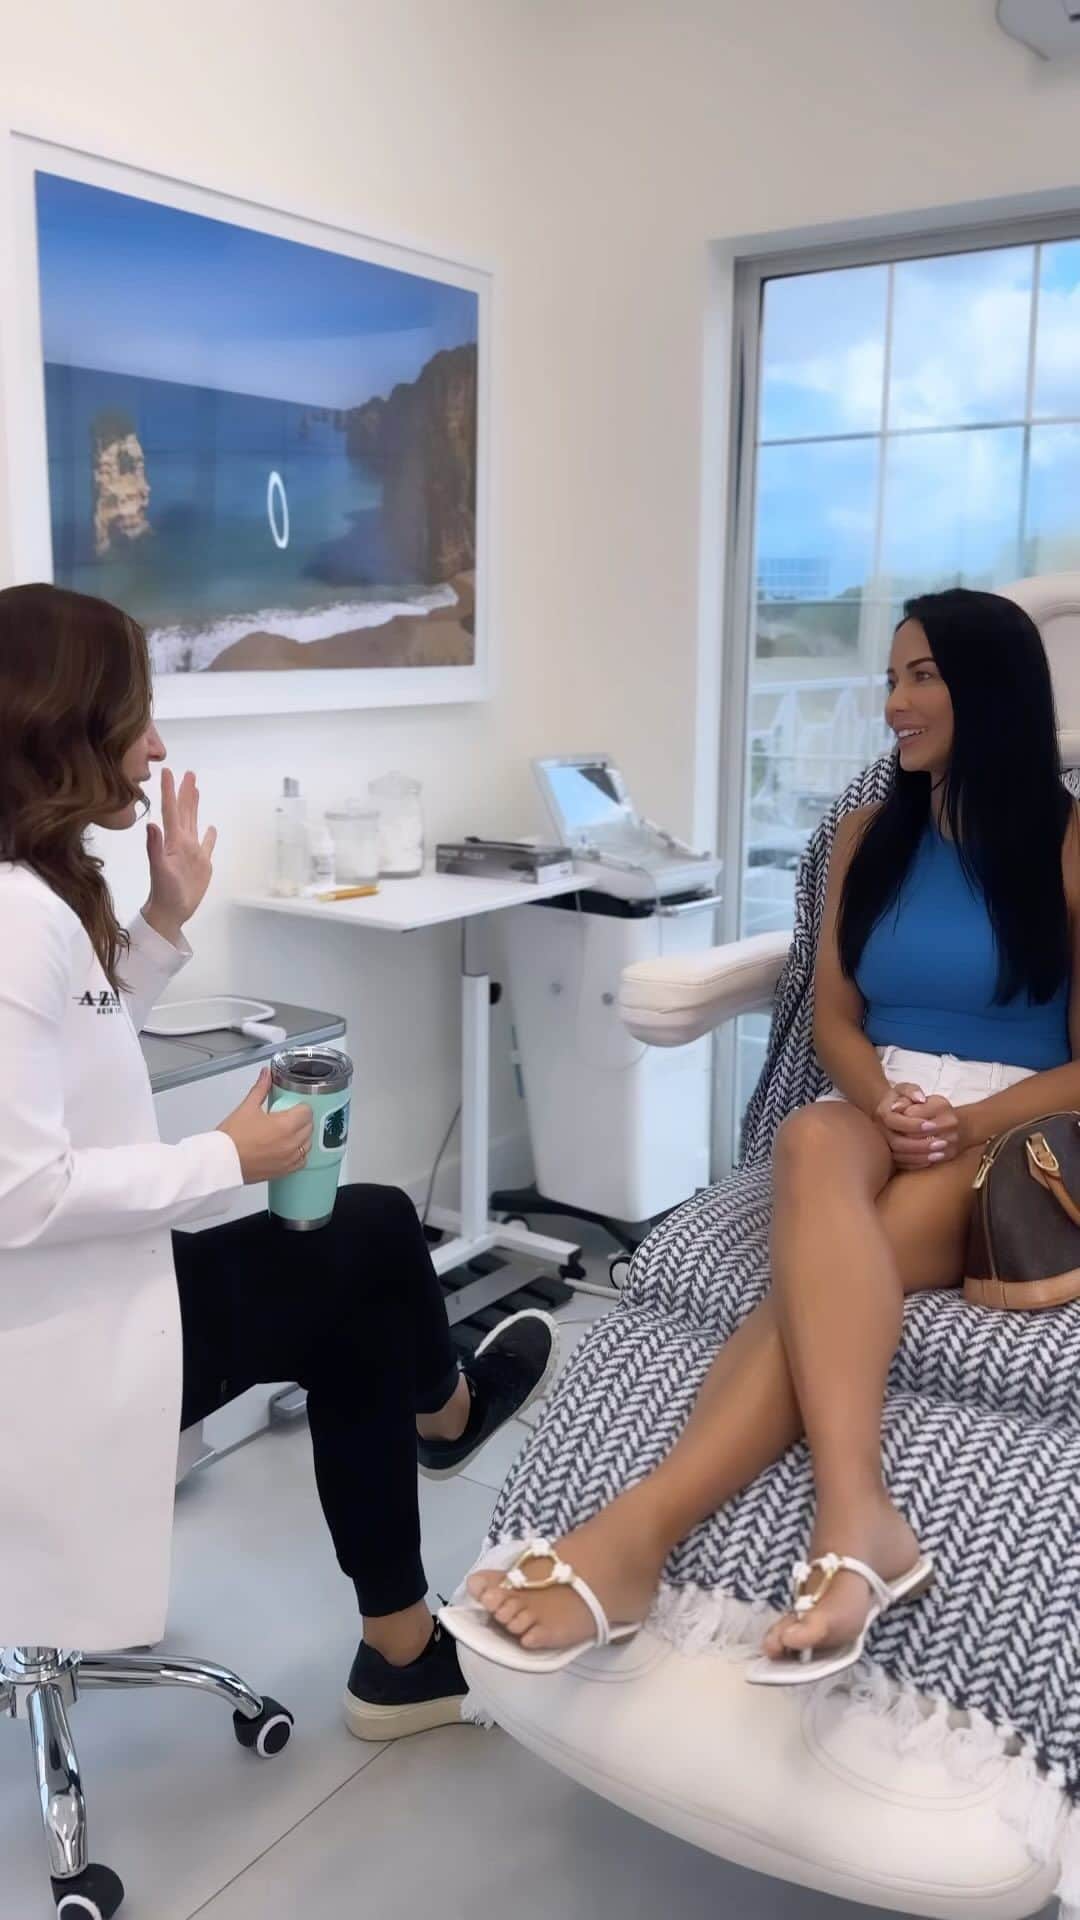 Melissa Risoのインスタグラム：「I finally found my go to nurse for #botox at @azalaskinclinic @miamidermpro is absolutely amazing! She is all about keeping the appearance natural, which is what I want. Her and her staff were so nice and inviting. The Medspa was super cute inside with Tulum vibes. I will definitely be a regular there for all my Medspa needs!」